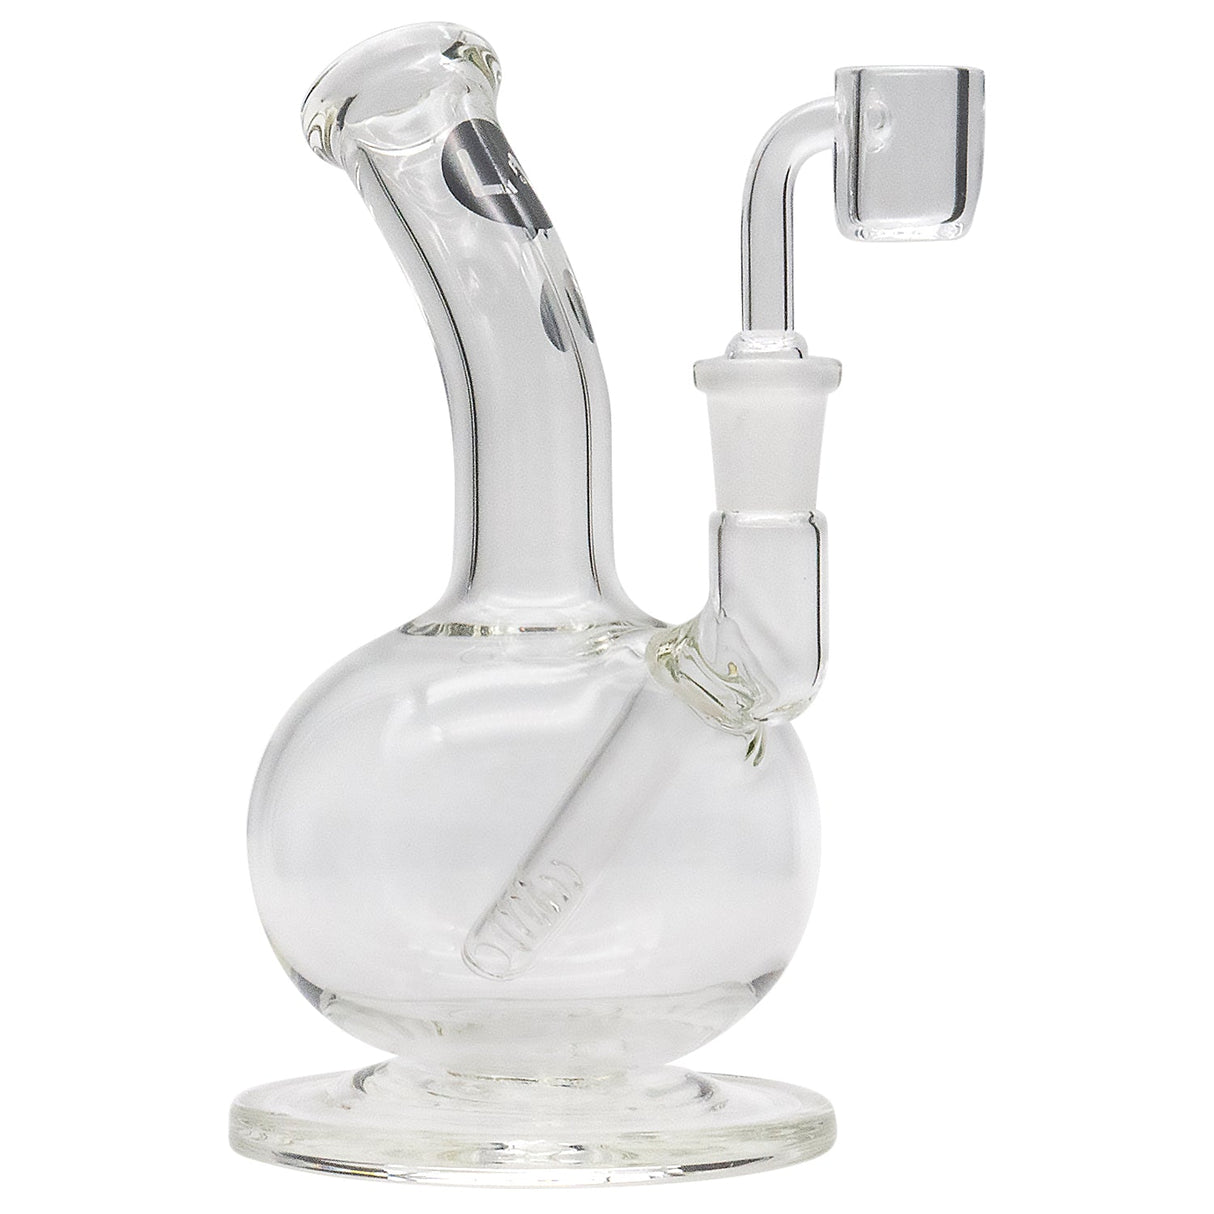 LA Pipes Bubble Base Concentrate Rig with Banger Hanger Design, 6" Tall, 14mm Female Joint, Side View